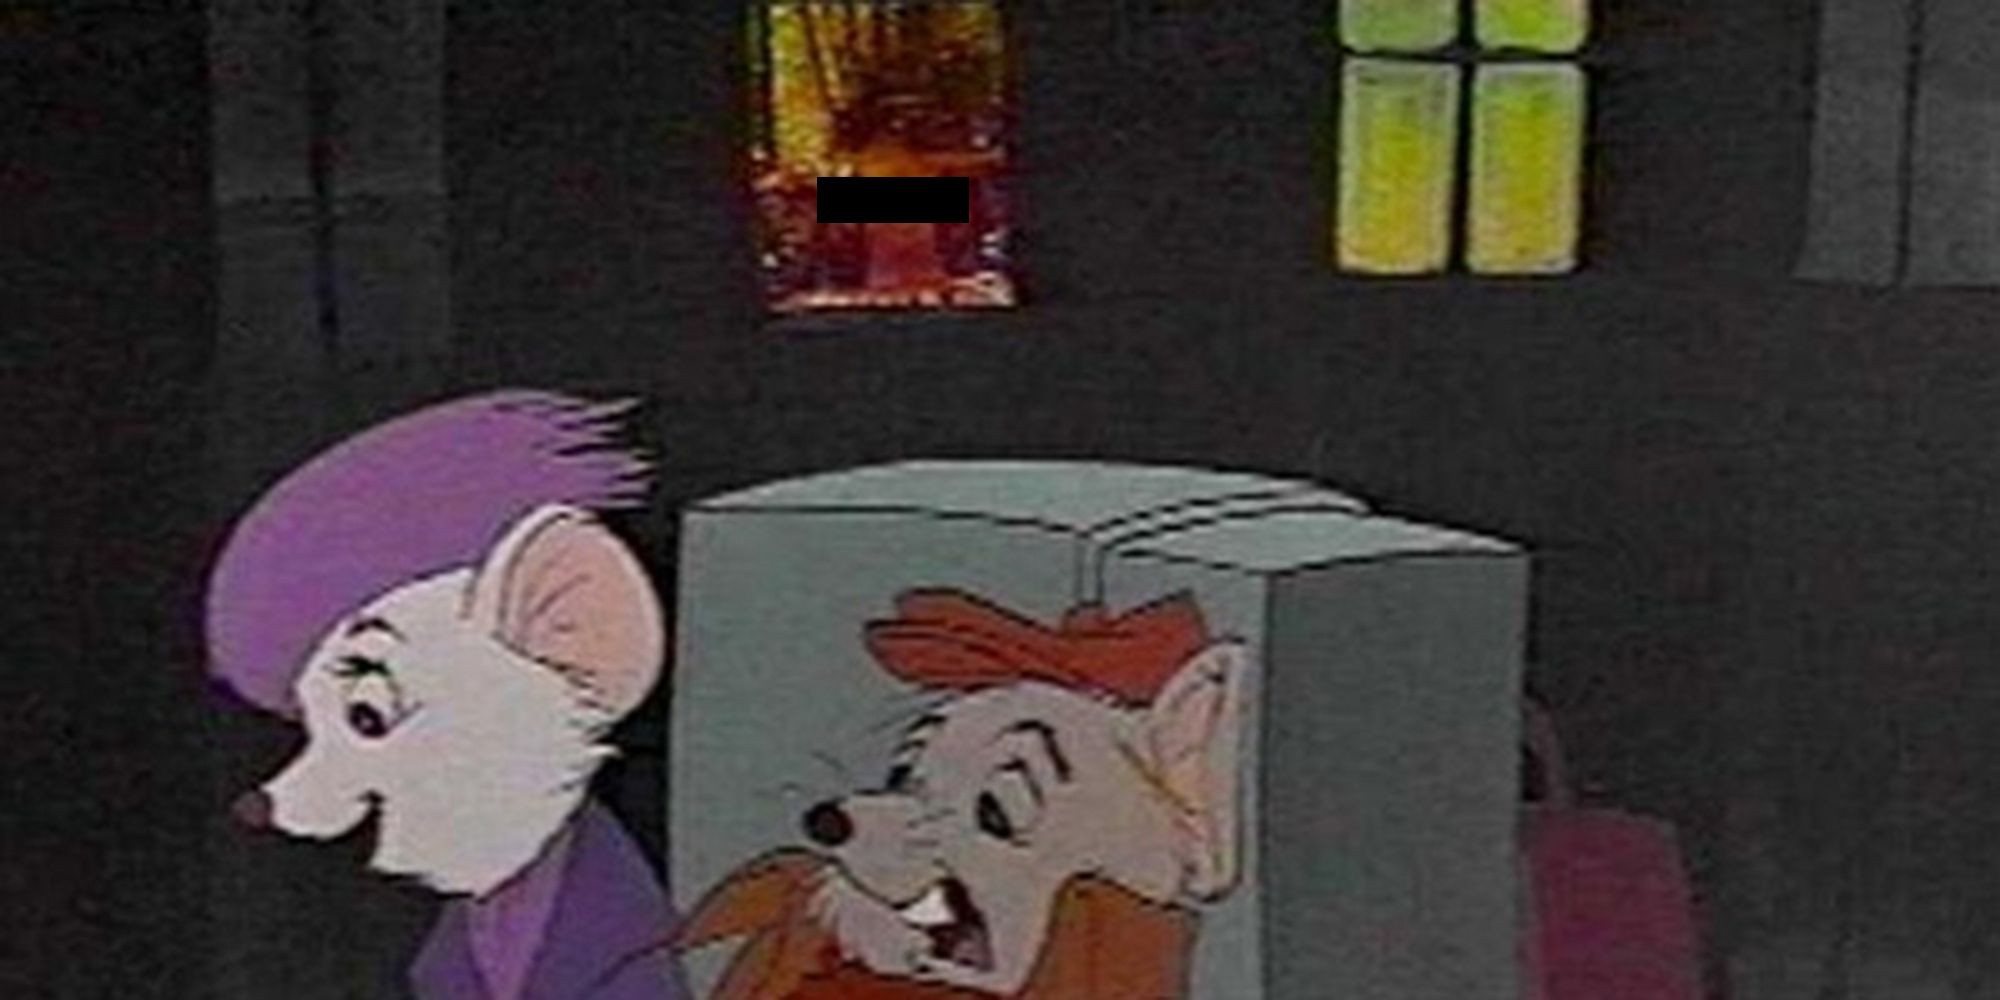 The Rescuers naked woman in the background